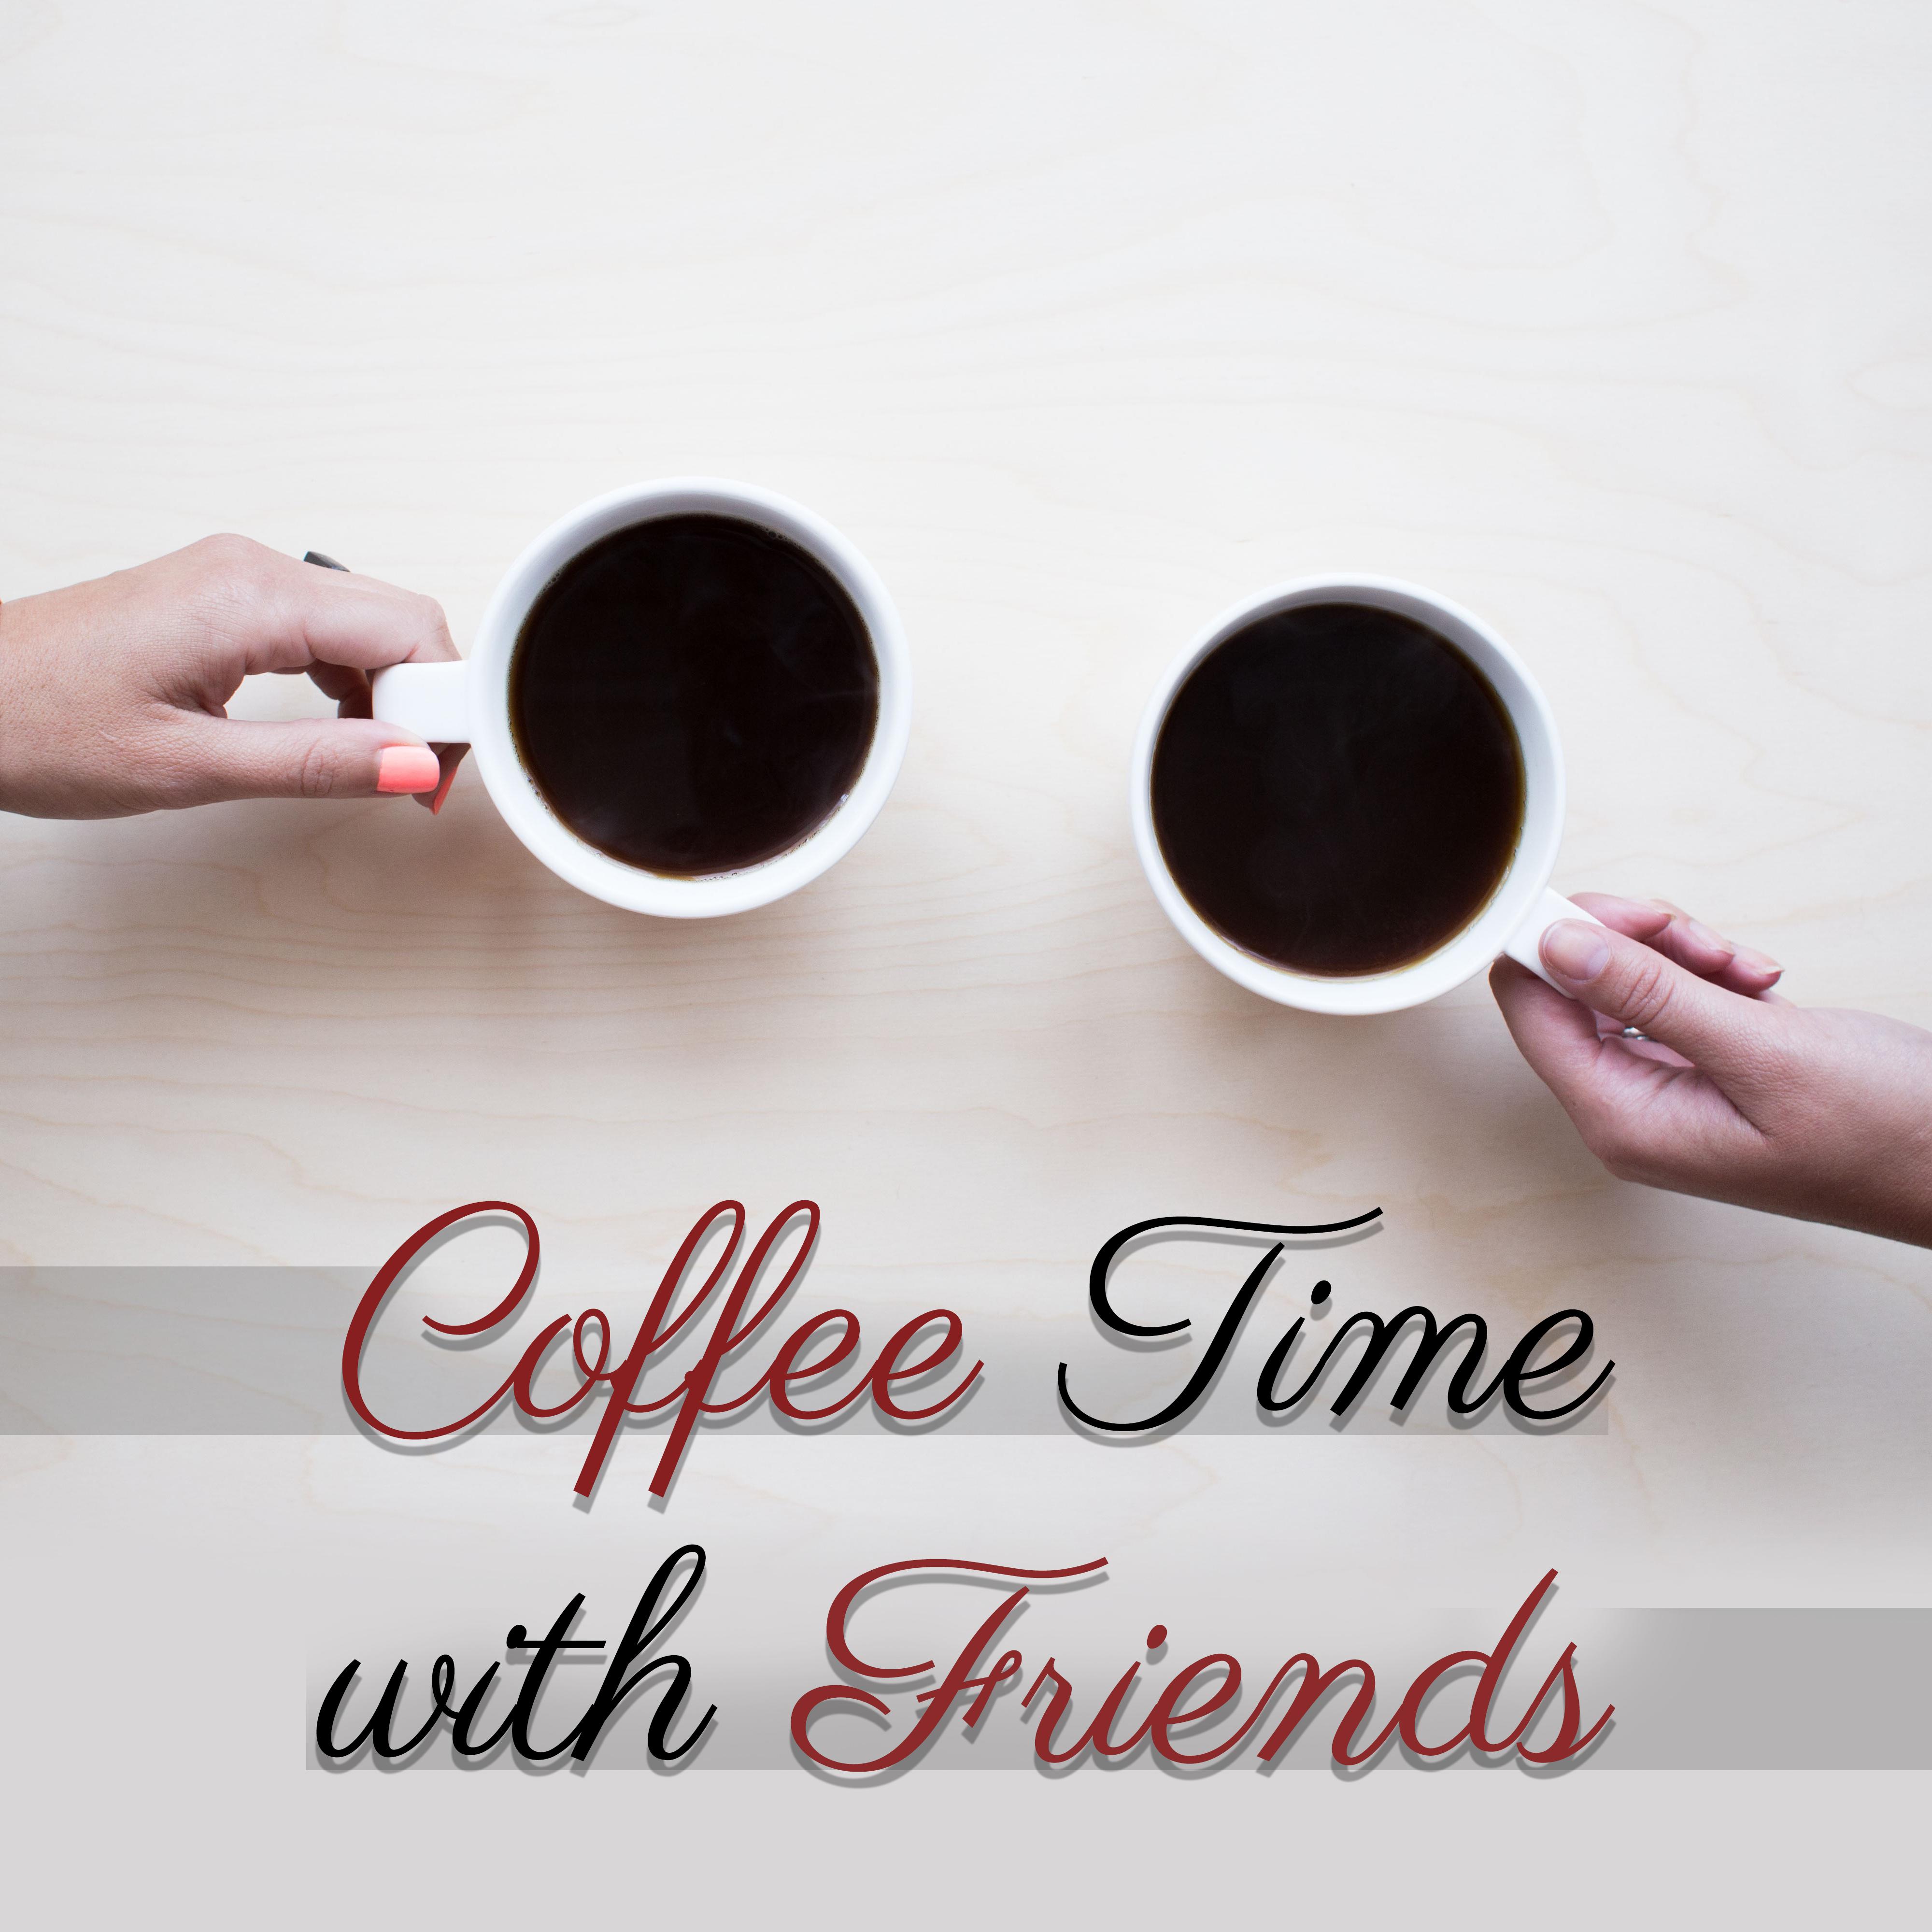 Coffee Time with Friends – Restaurant Jazz Music, Instrumental Piano, Jazz Cafe, Deep Relax, Smooth Jazz, Chillout, Calming Songs